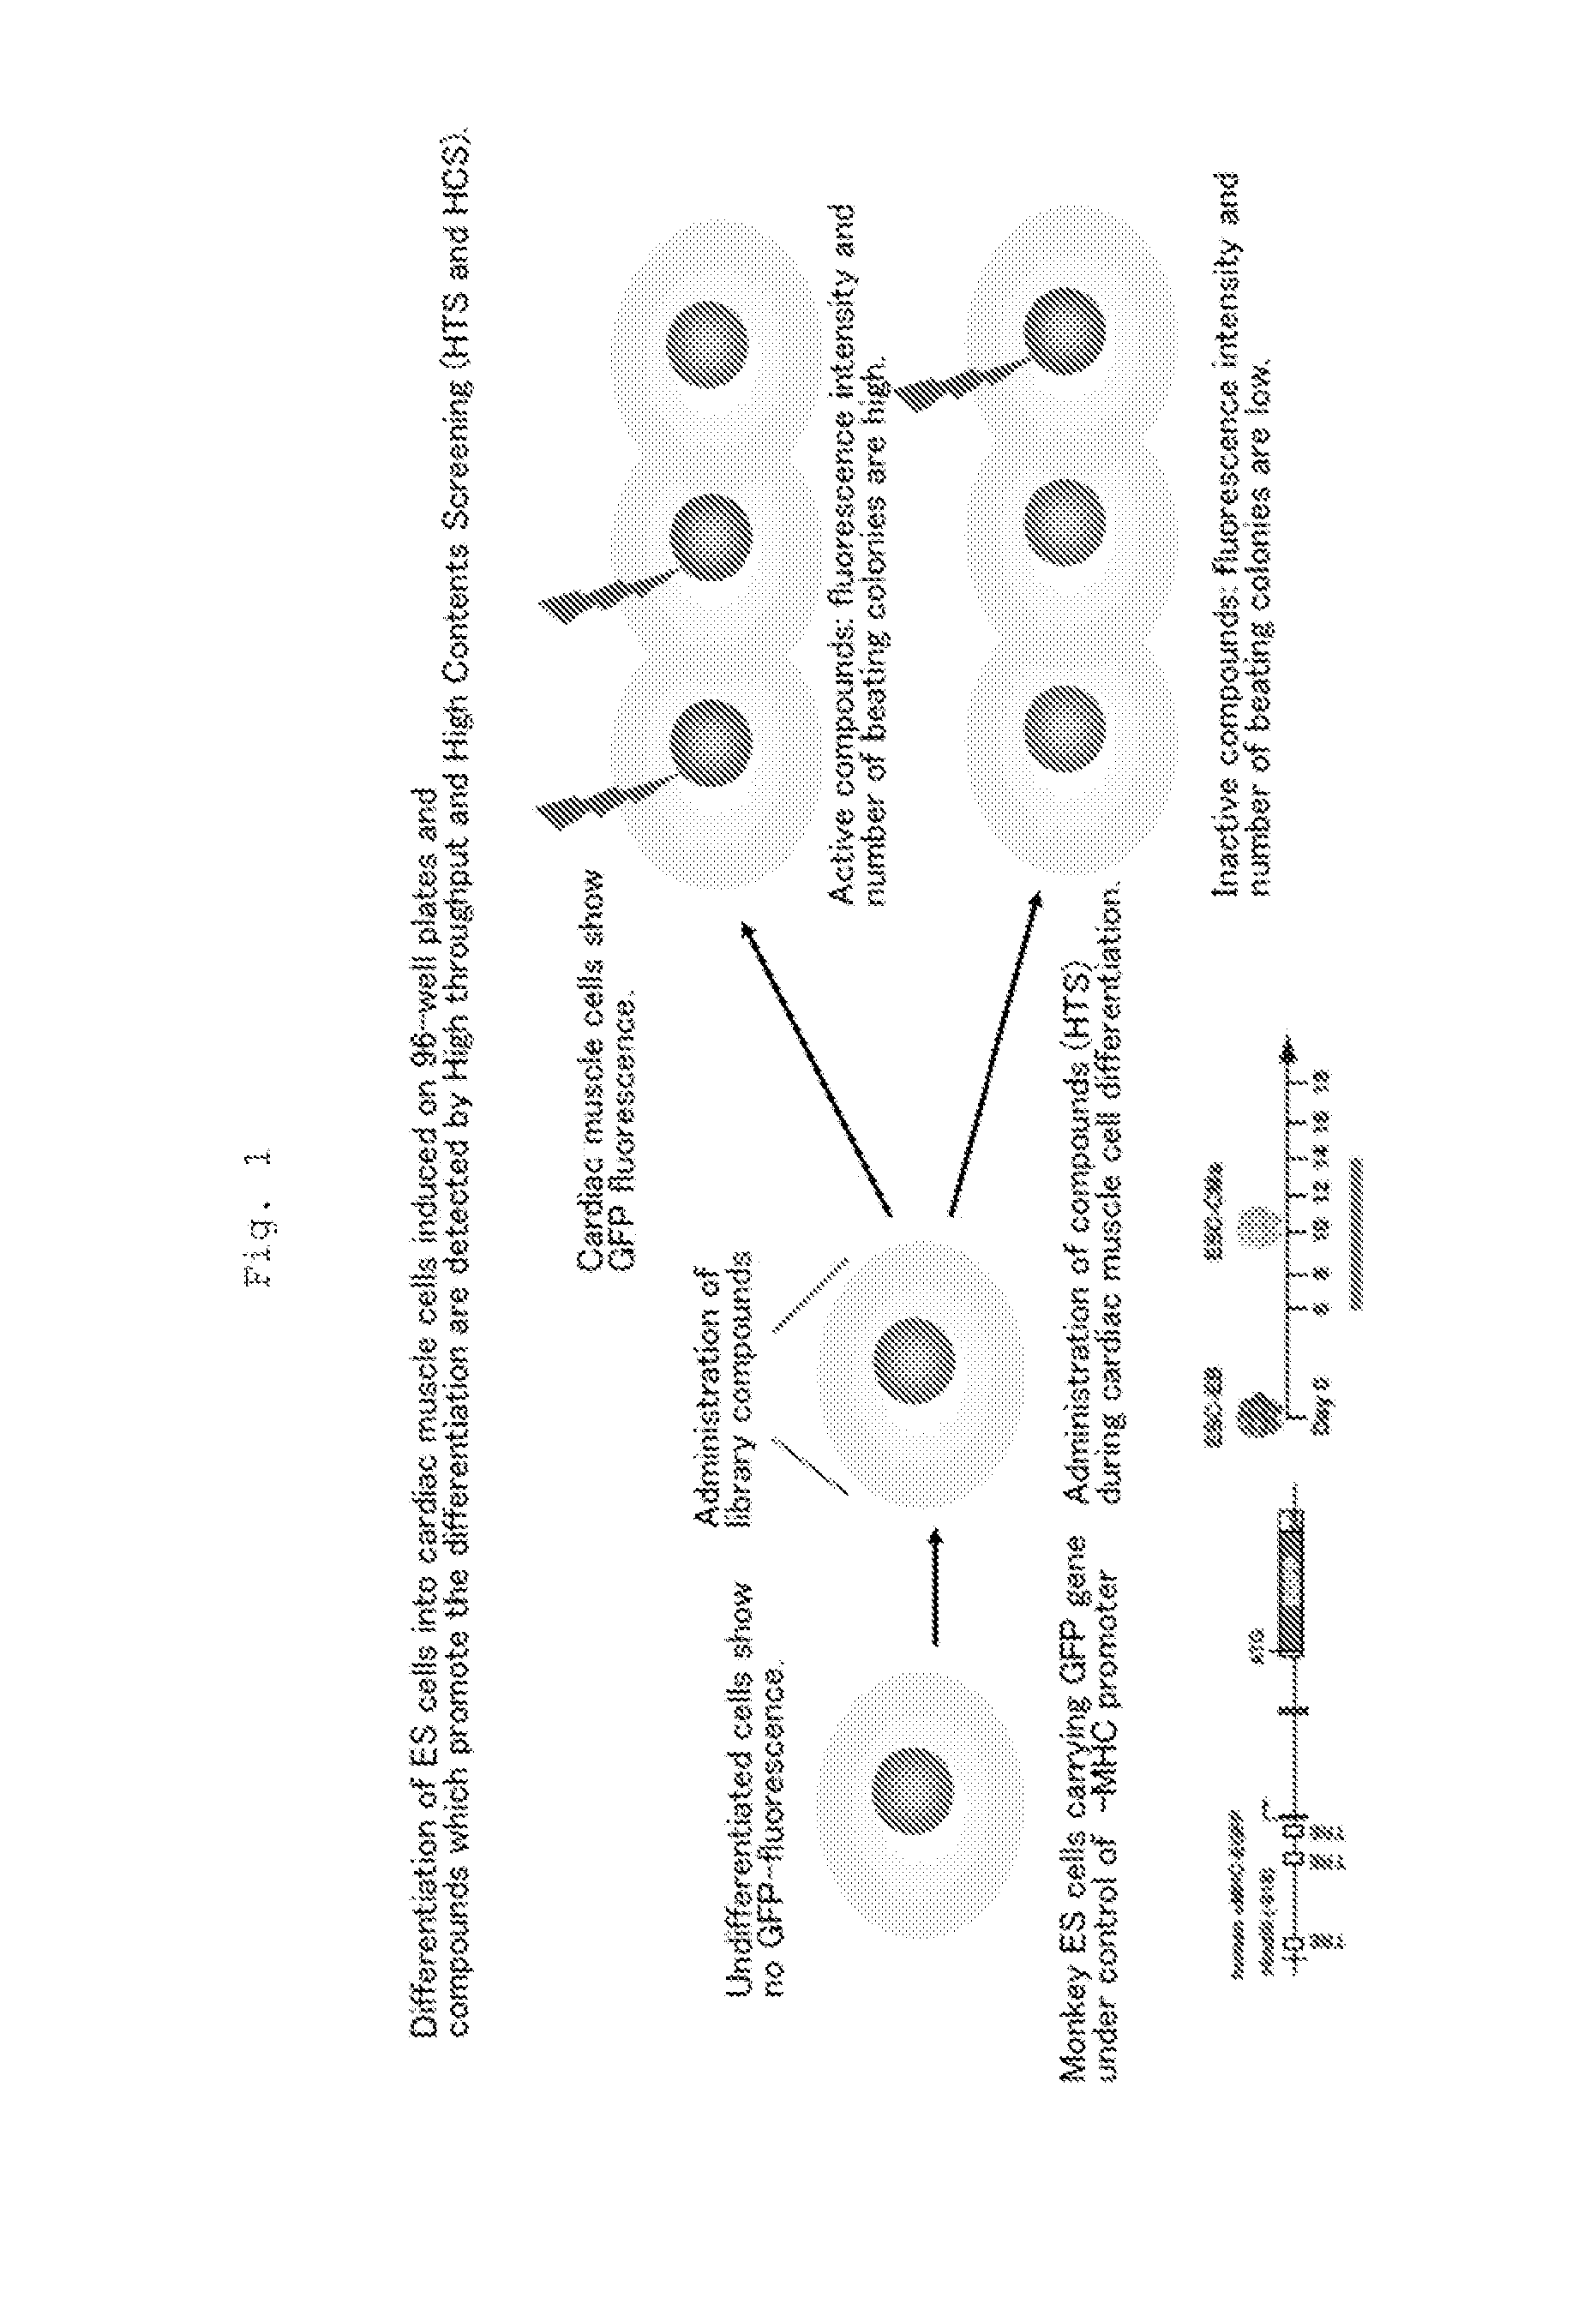 Method for Promoting Differentiation of Pluripotent Stem Cells into Cardiac Muscle Cells